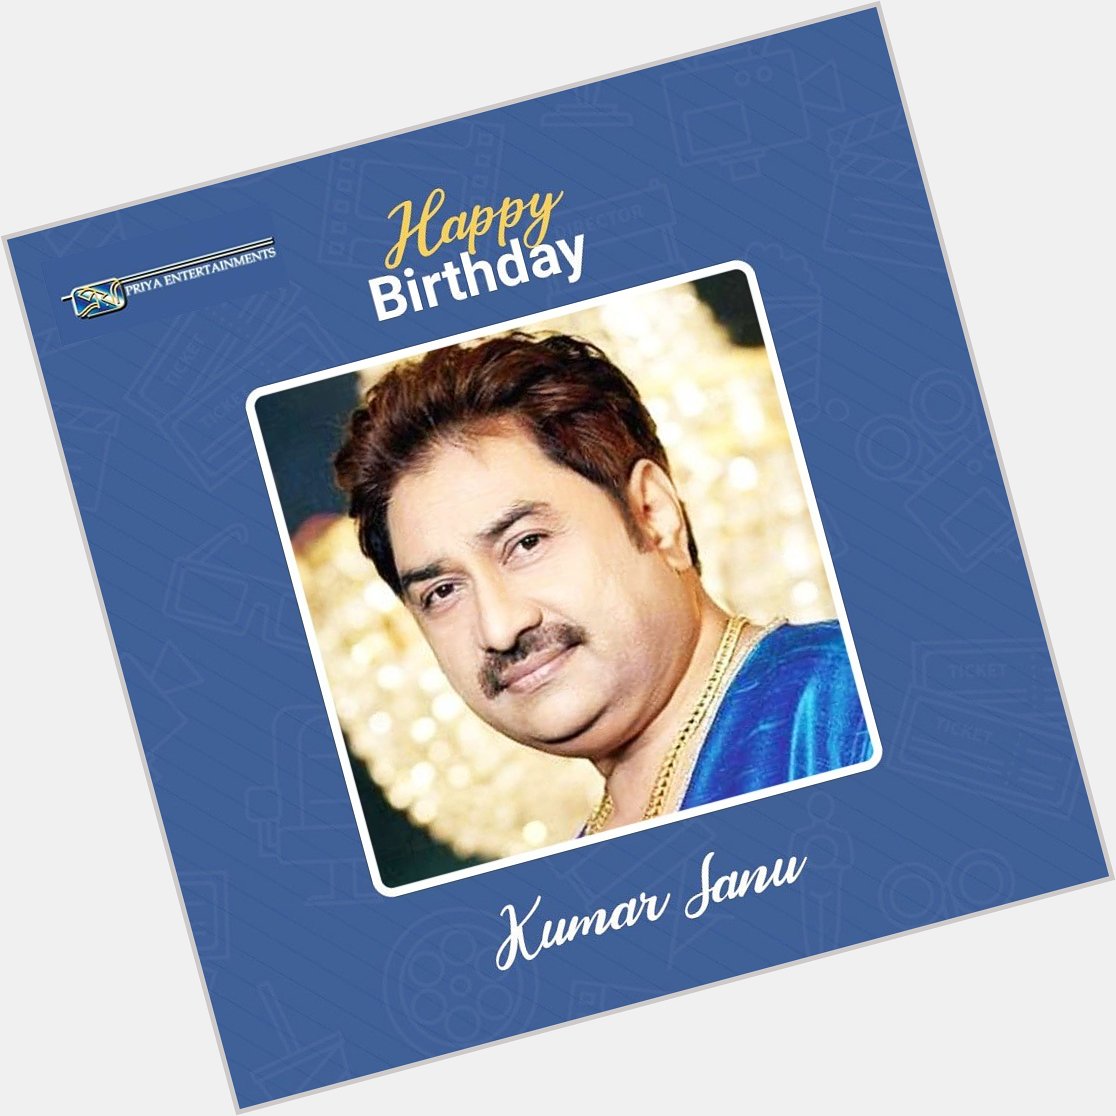 Wishing one of the most celebrated playback singers of Indian Cinema, Kumar Sanu A Very Happy Birthday.. 